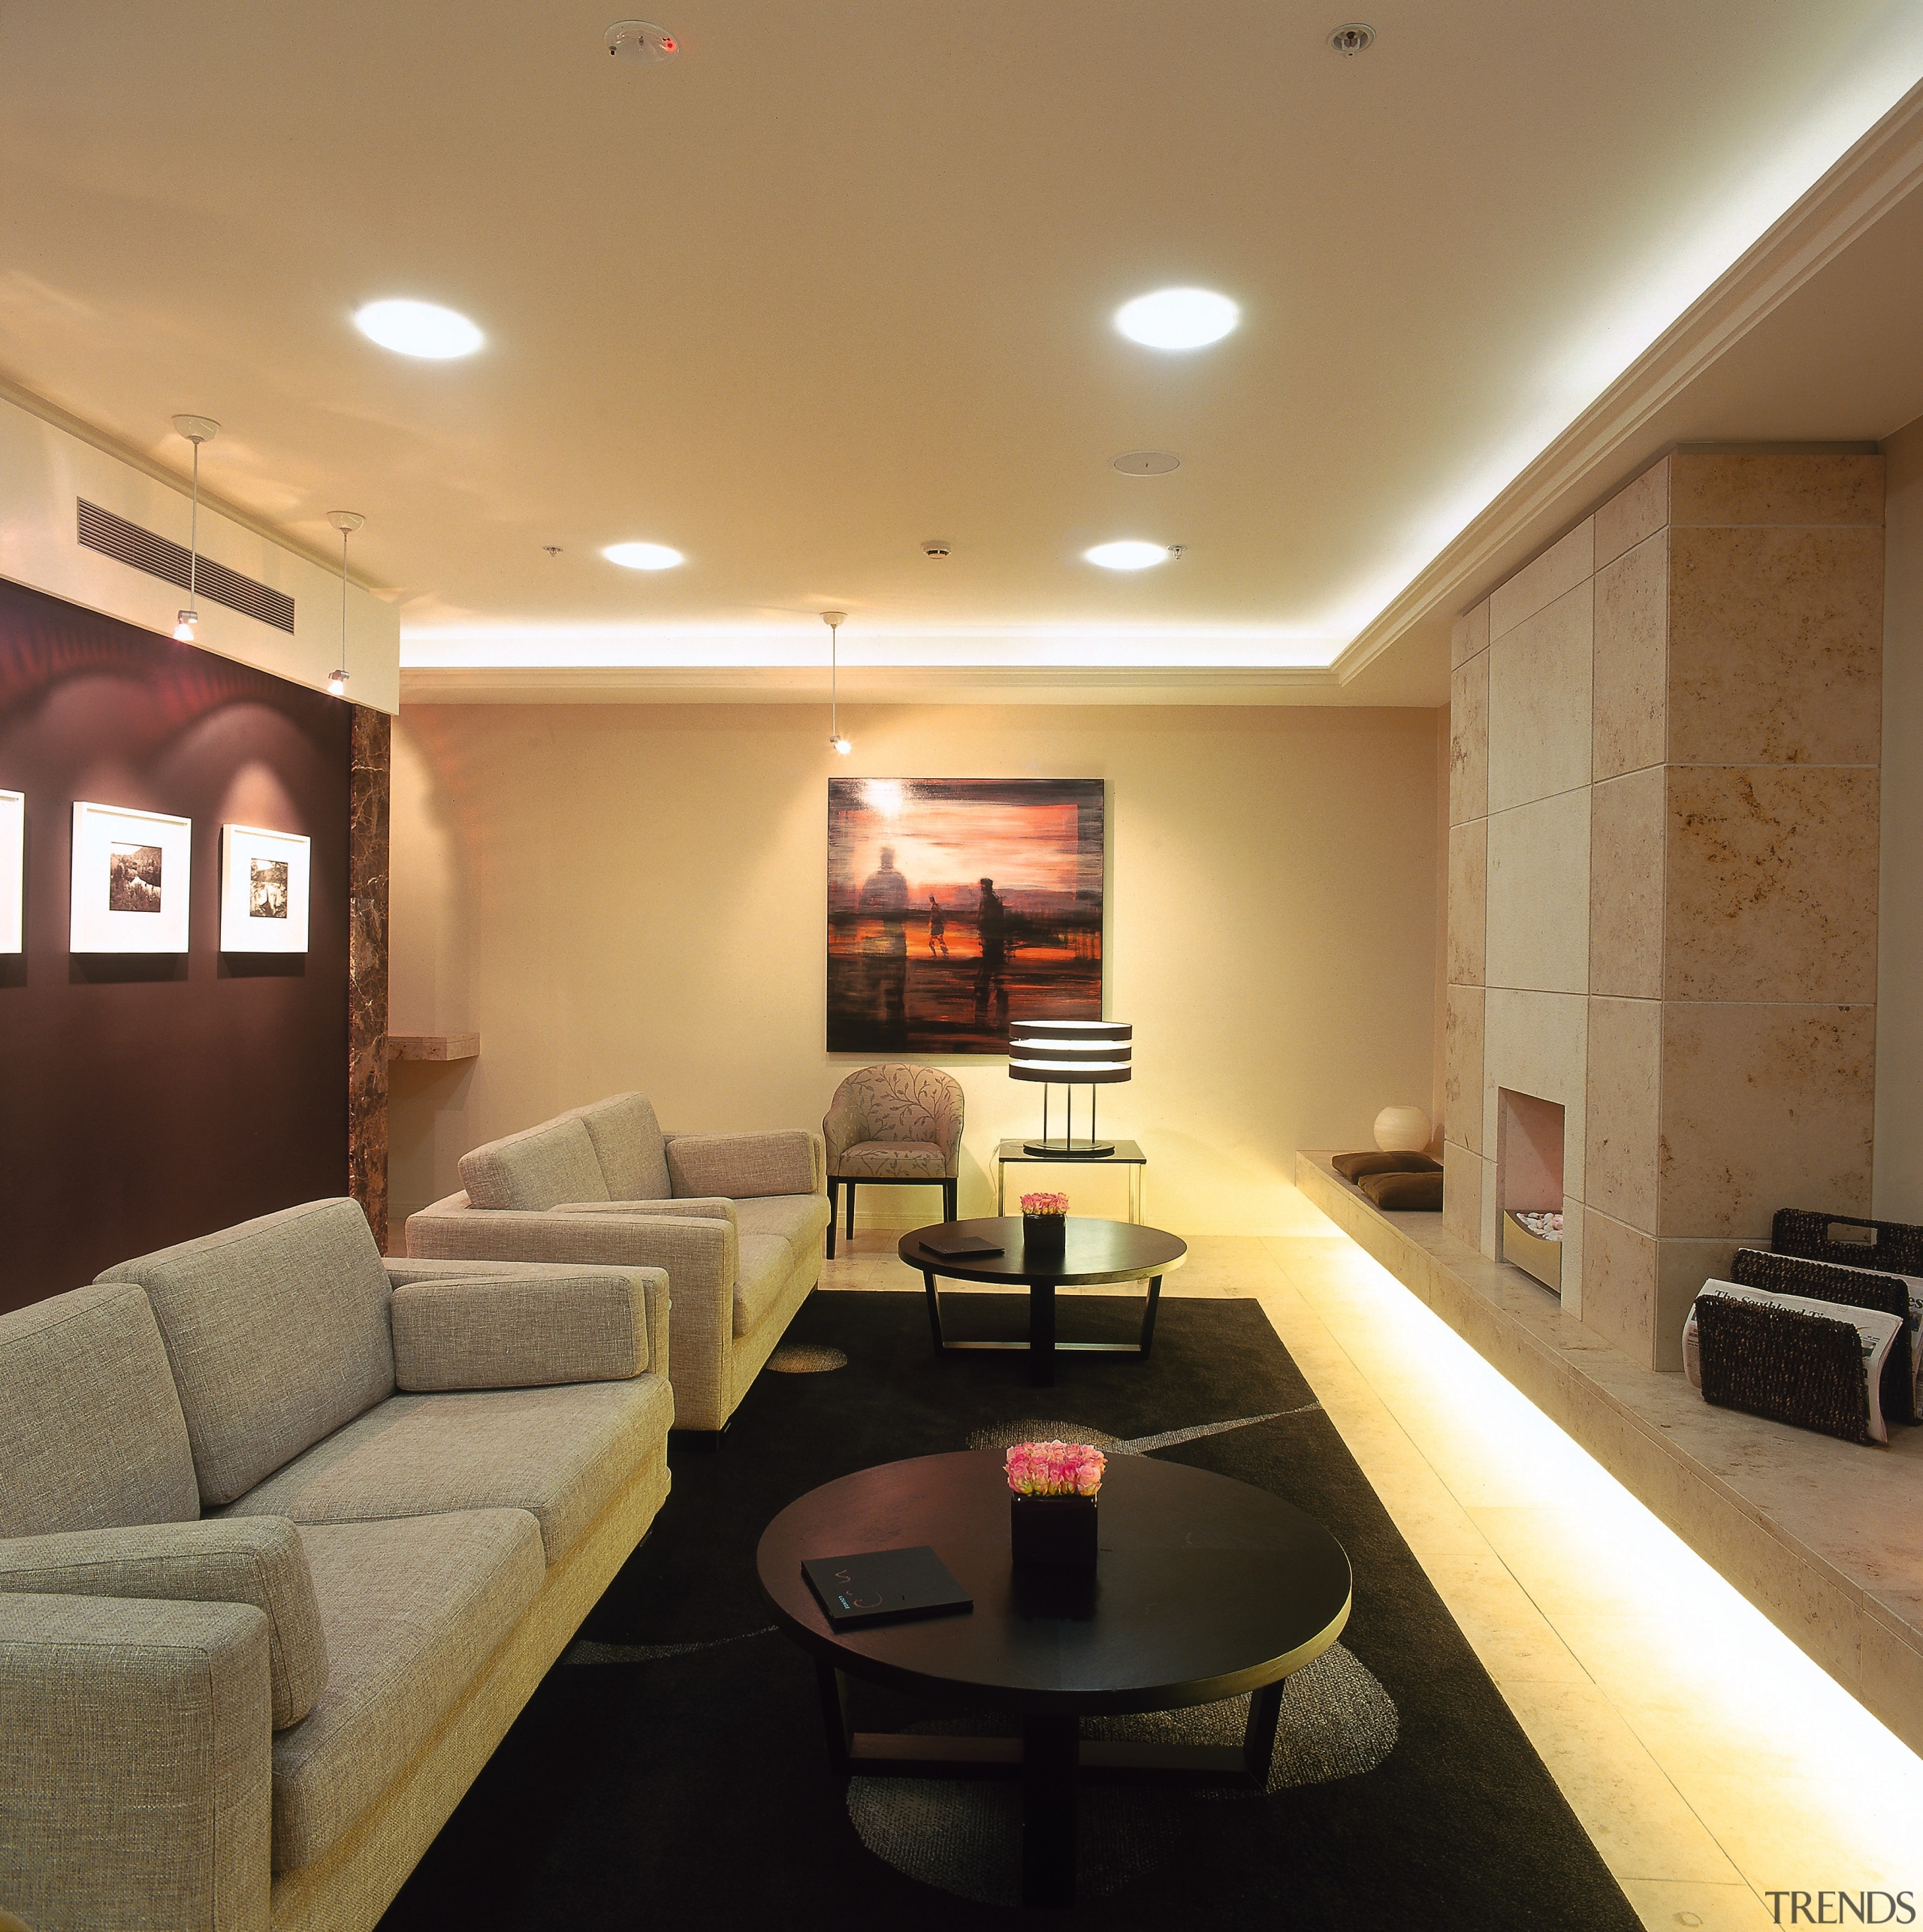 A view of the business lounge. - A ceiling, floor, interior design, lighting, living room, lobby, real estate, room, wall, brown, orange